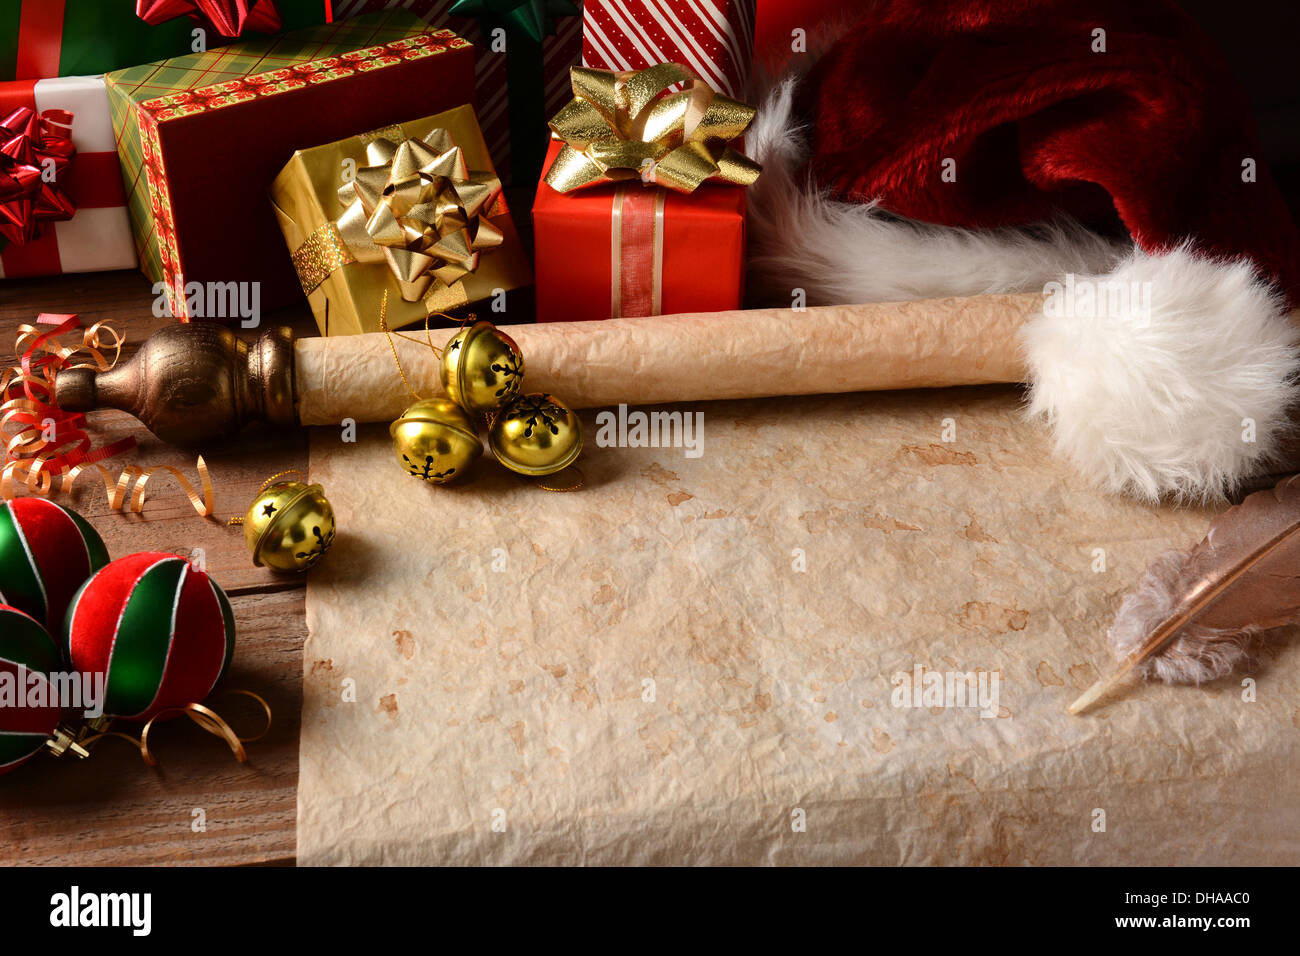 A Christmas Still Life with an old parchment scroll, presents, ornaments and a Santa Hat. Stock Photo